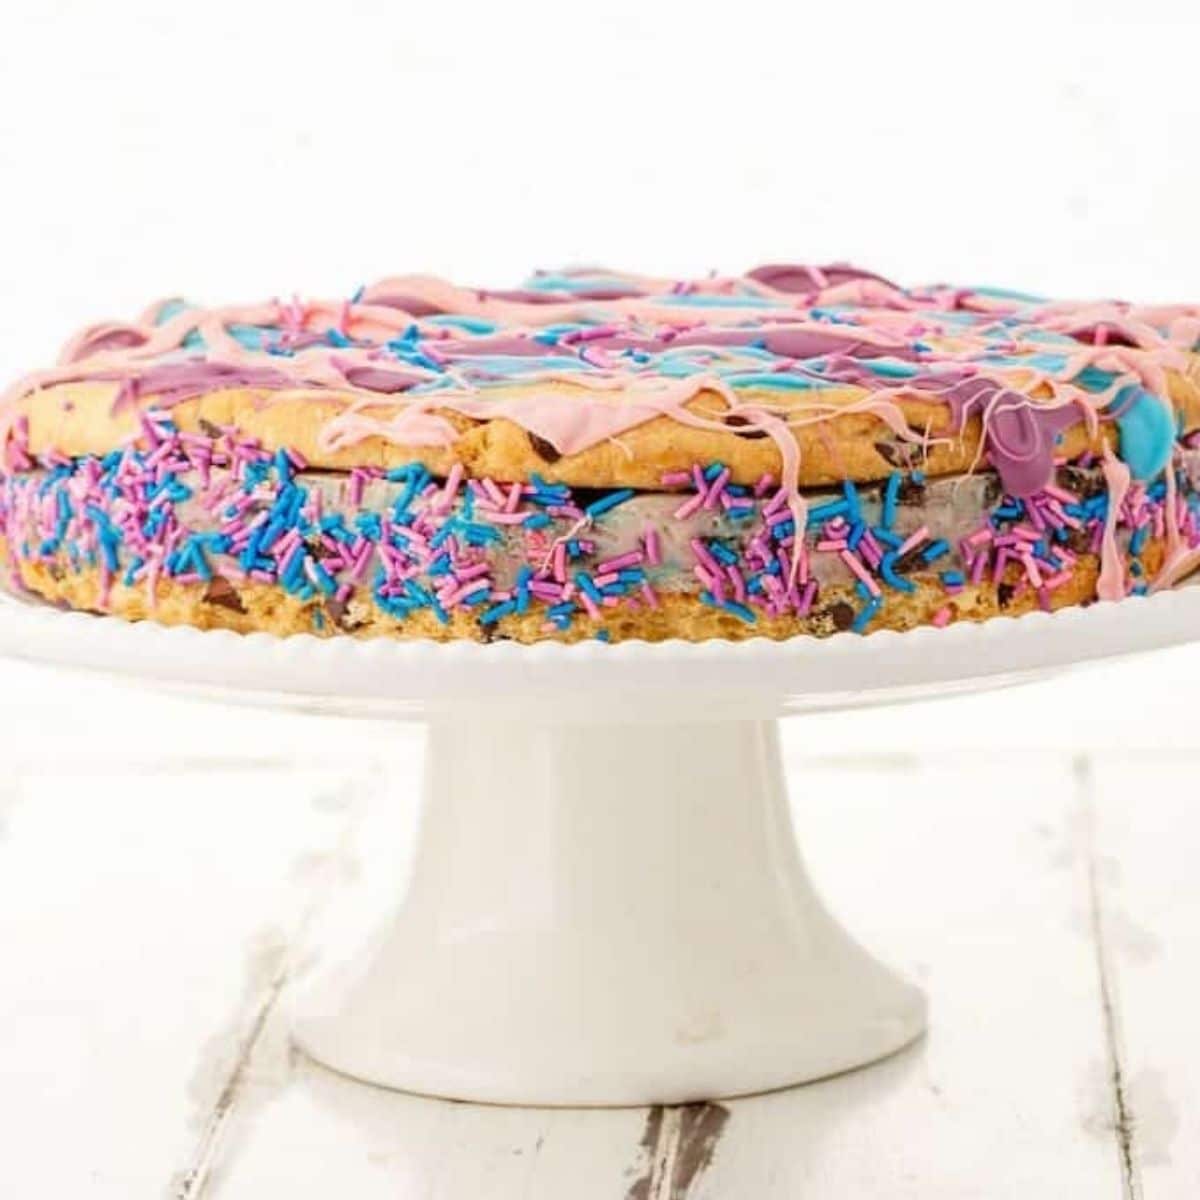 Giant Sandwich Cookie Cake – With Sprinkles on Top